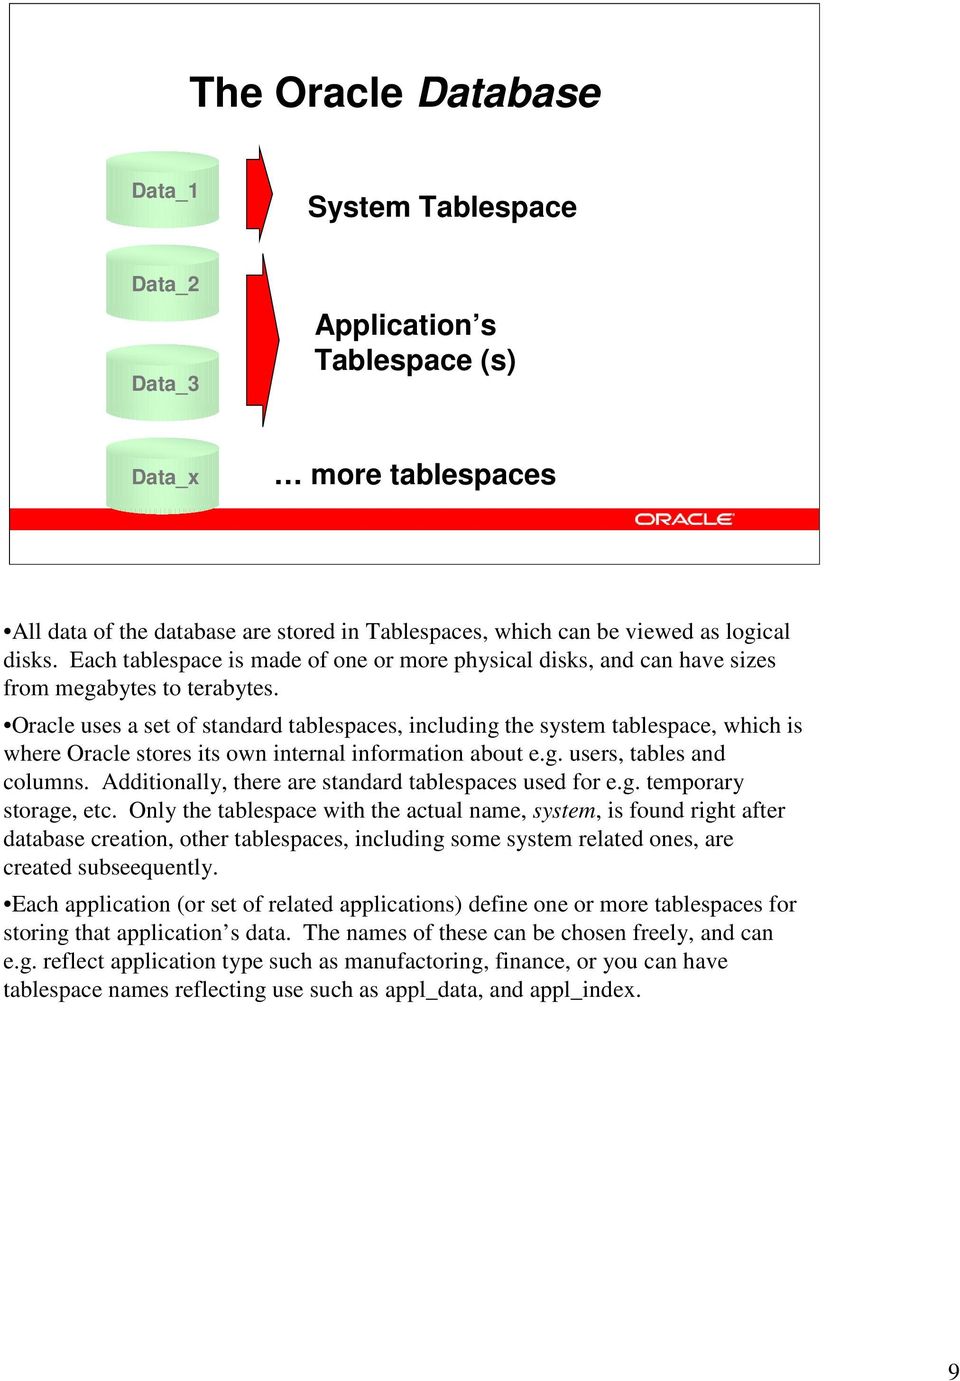 Oracle uses a set of standard tablespaces, including the system tablespace, which is where Oracle stores its own internal information about e.g. users, tables and columns.